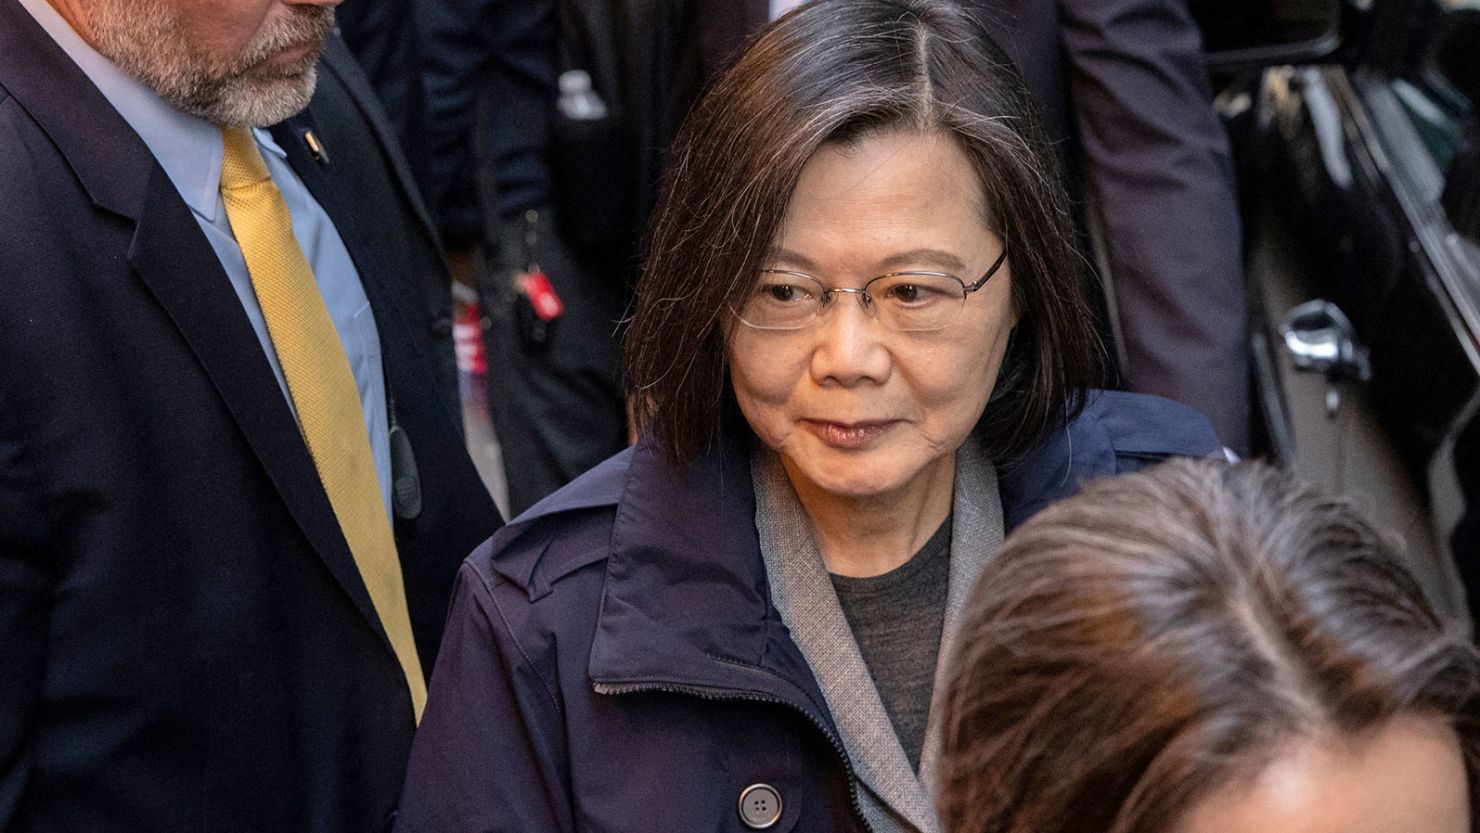 Taiwan's President Tsai Ing-wen leaves the Lotte Hotel in Manhattan in New York City on March 29, 2023.